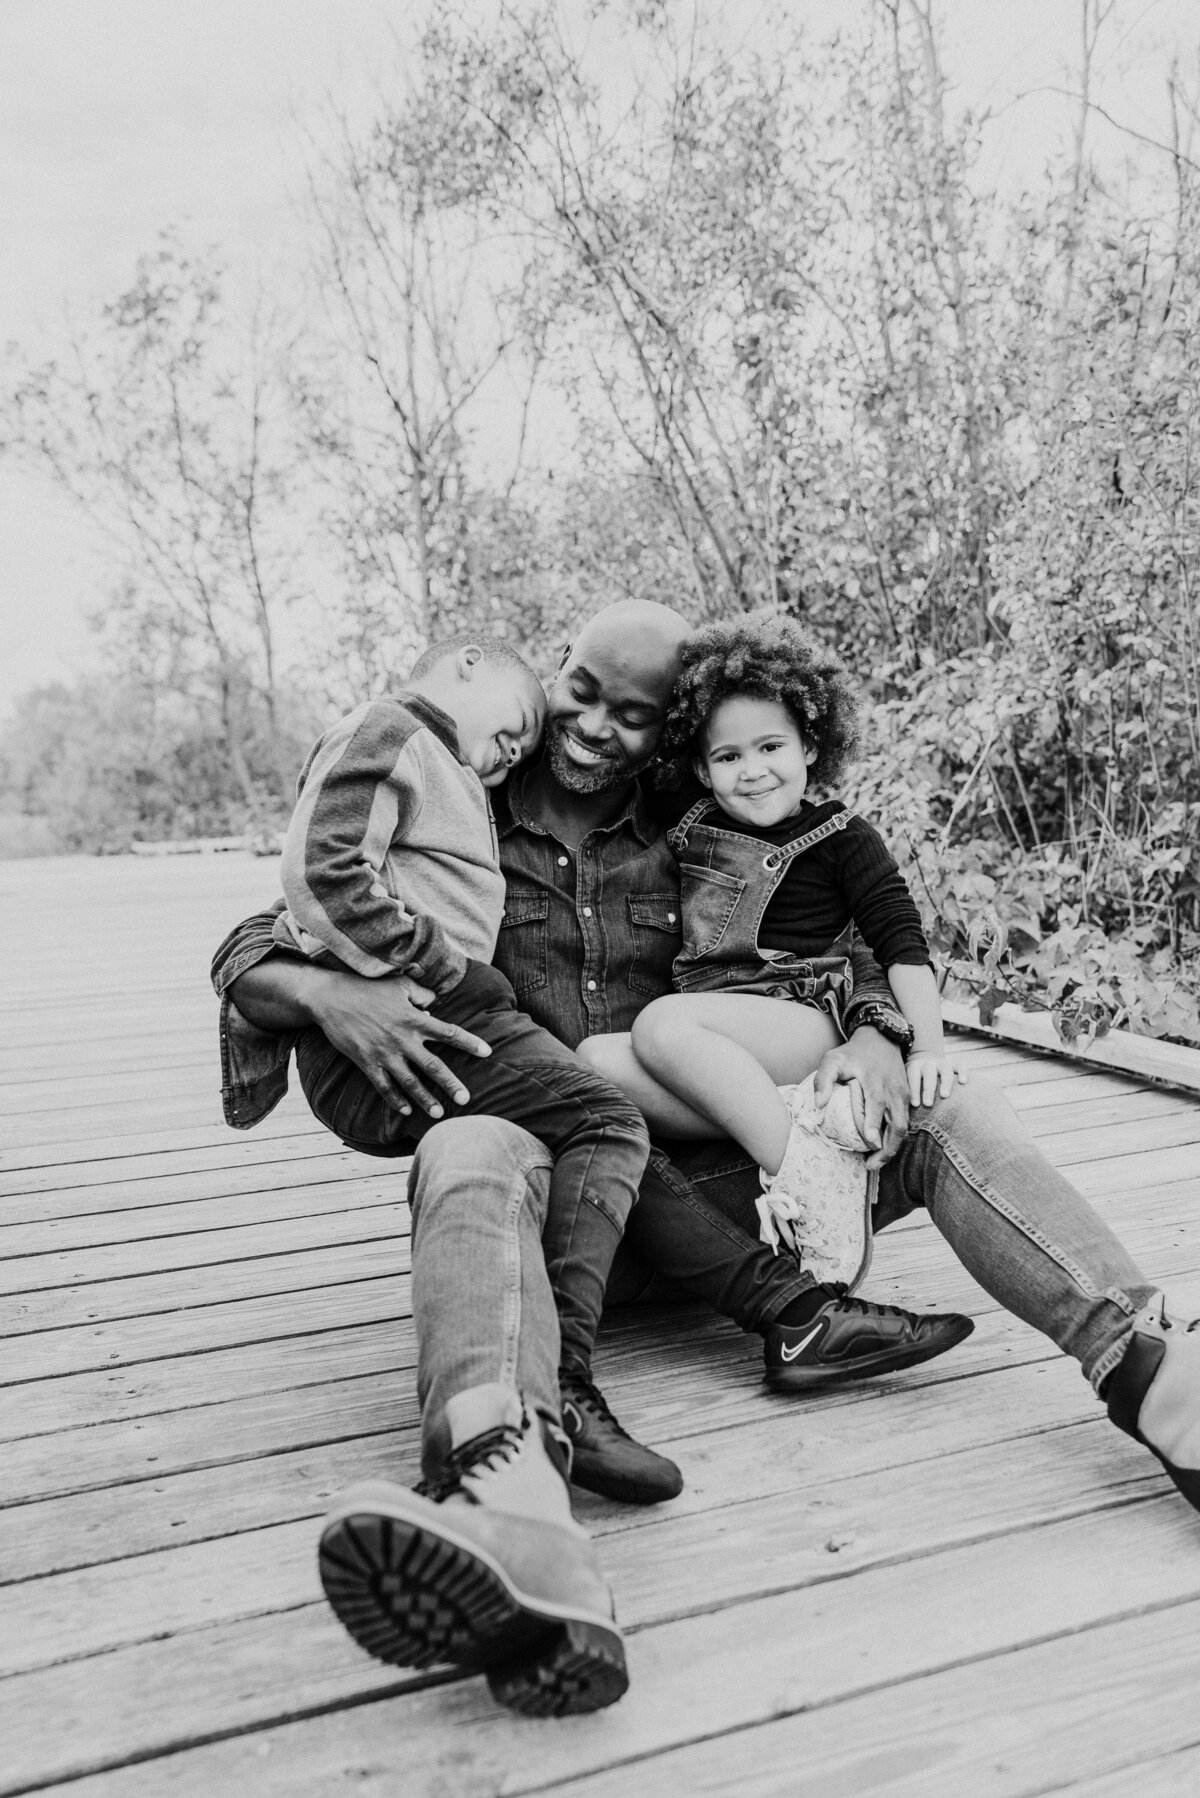 Celebrate family ties with a timeless portrait captured at Roseville's Central Park. Embrace the genuine moments shared between a loving dad and his children in this picturesque outdoor setting